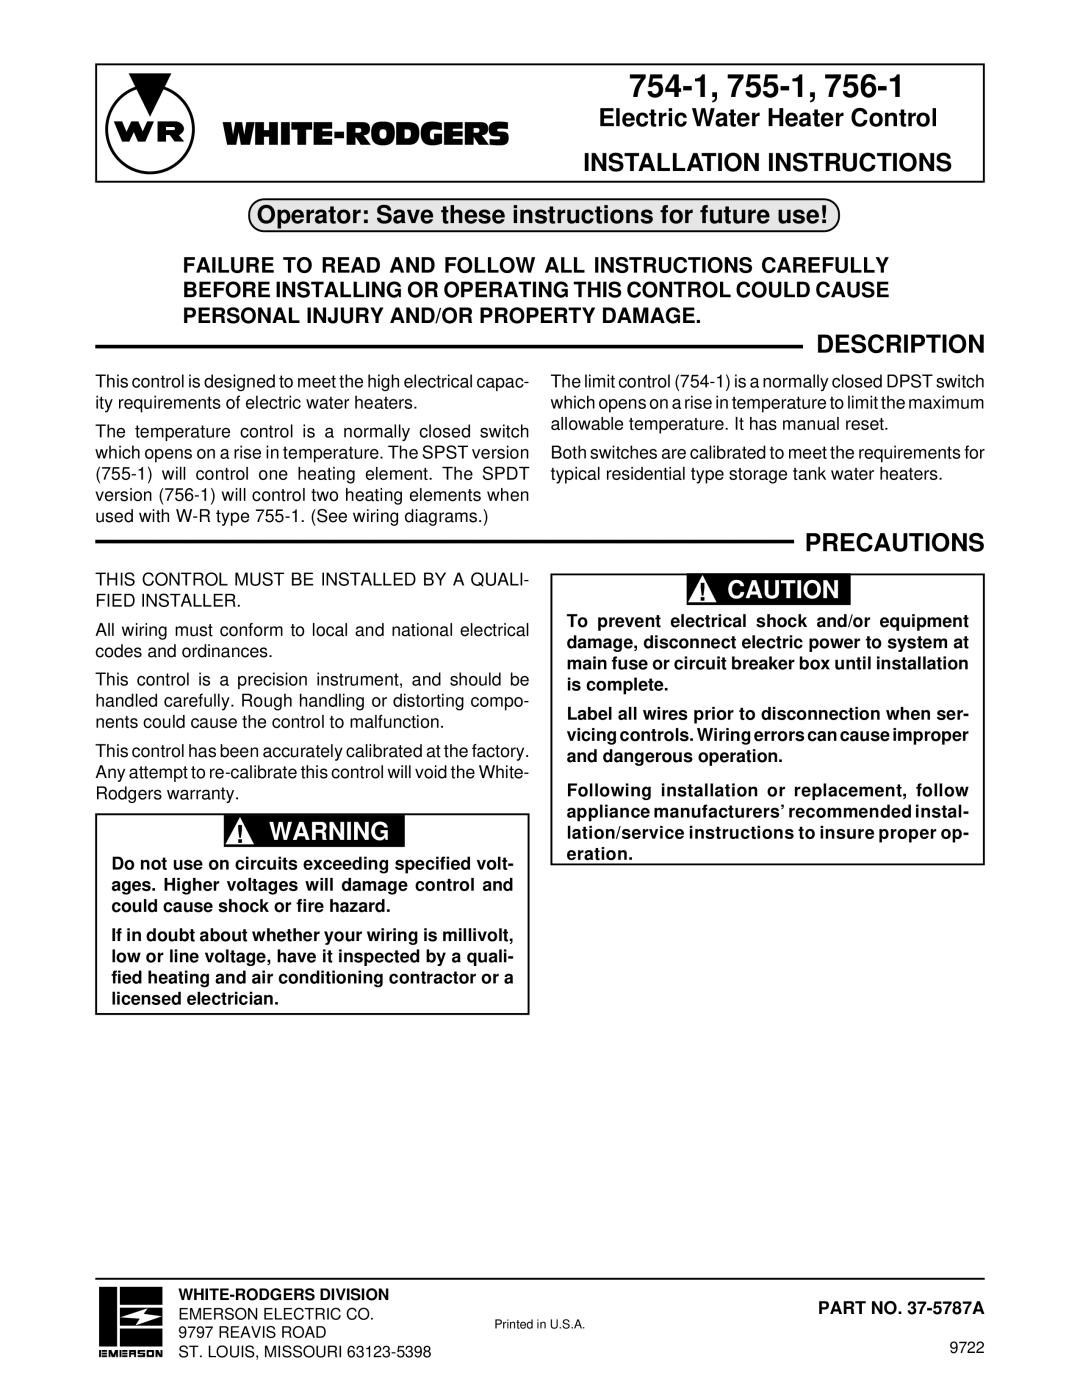 White Rodgers 755-1, 756-1 installation instructions 754-1, White-Rodgers, Electric Water Heater Control, Description 